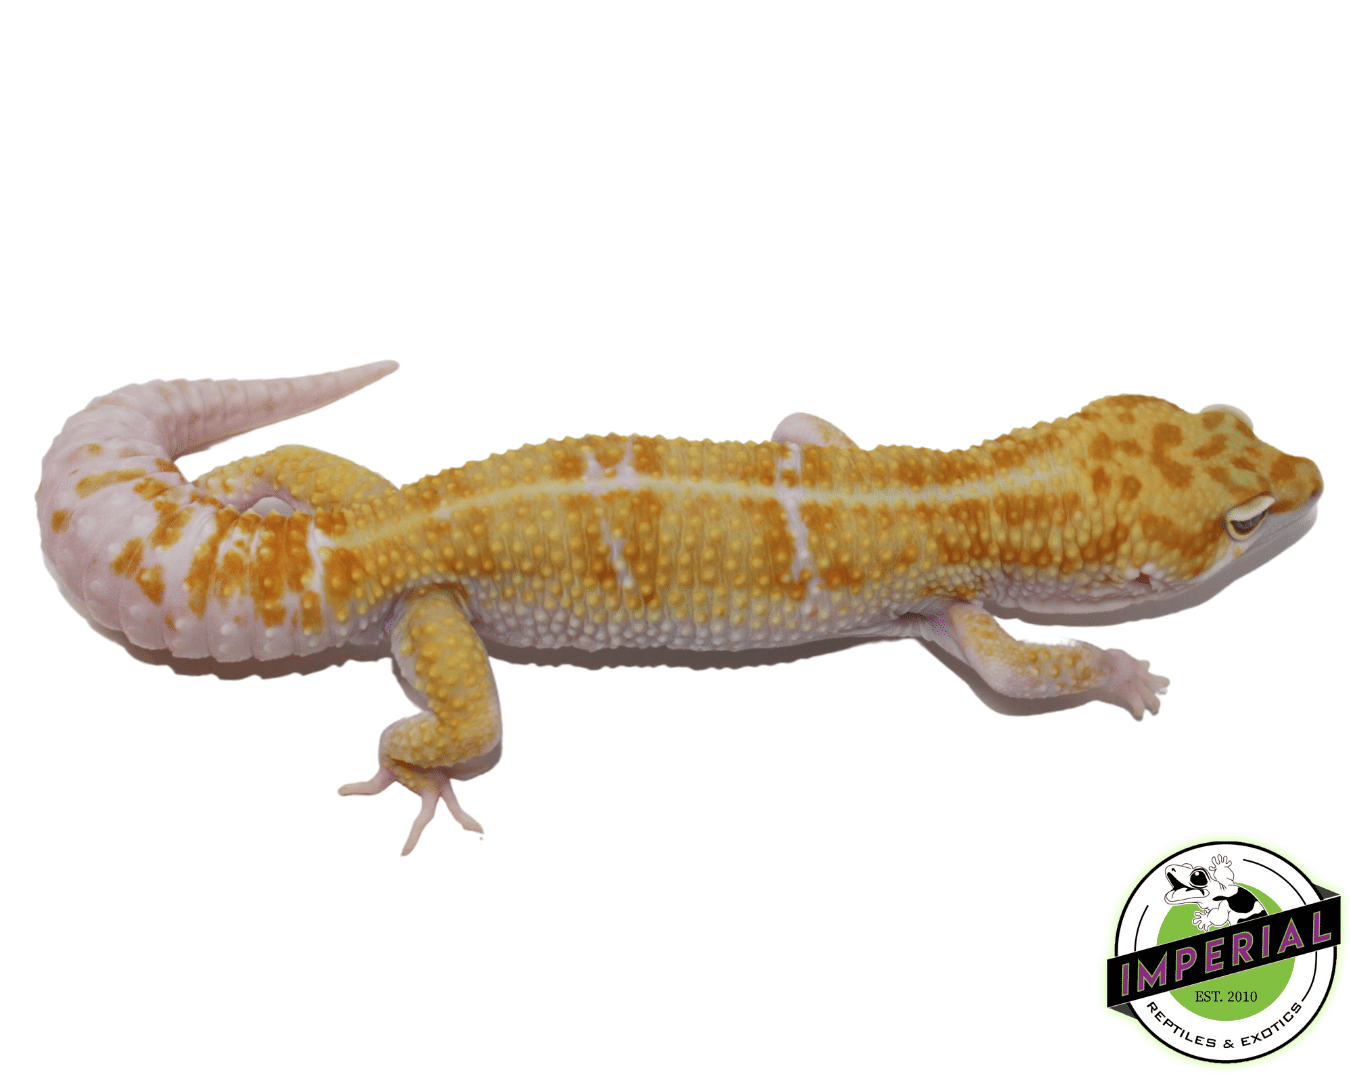 tangerine tremper white and yellow leopard gecko for sale, buy reptiles online